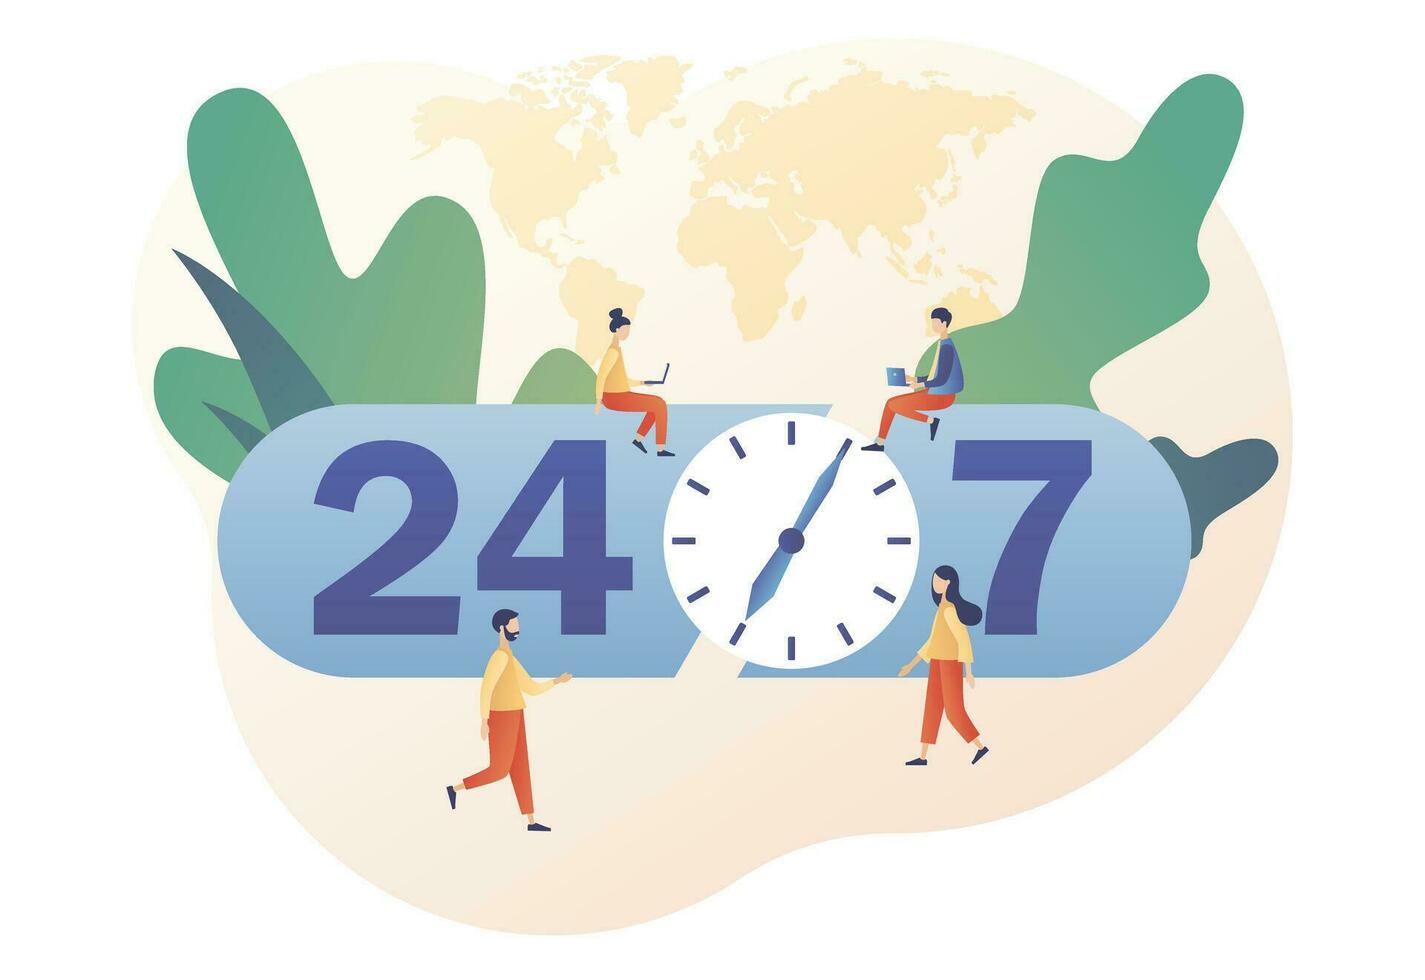 Around clock. 24 hours watch with arrow. 24-7 support service, open, time, working hours, delivery concept. Modern flat cartoon style. Vector illustration on white backgroun